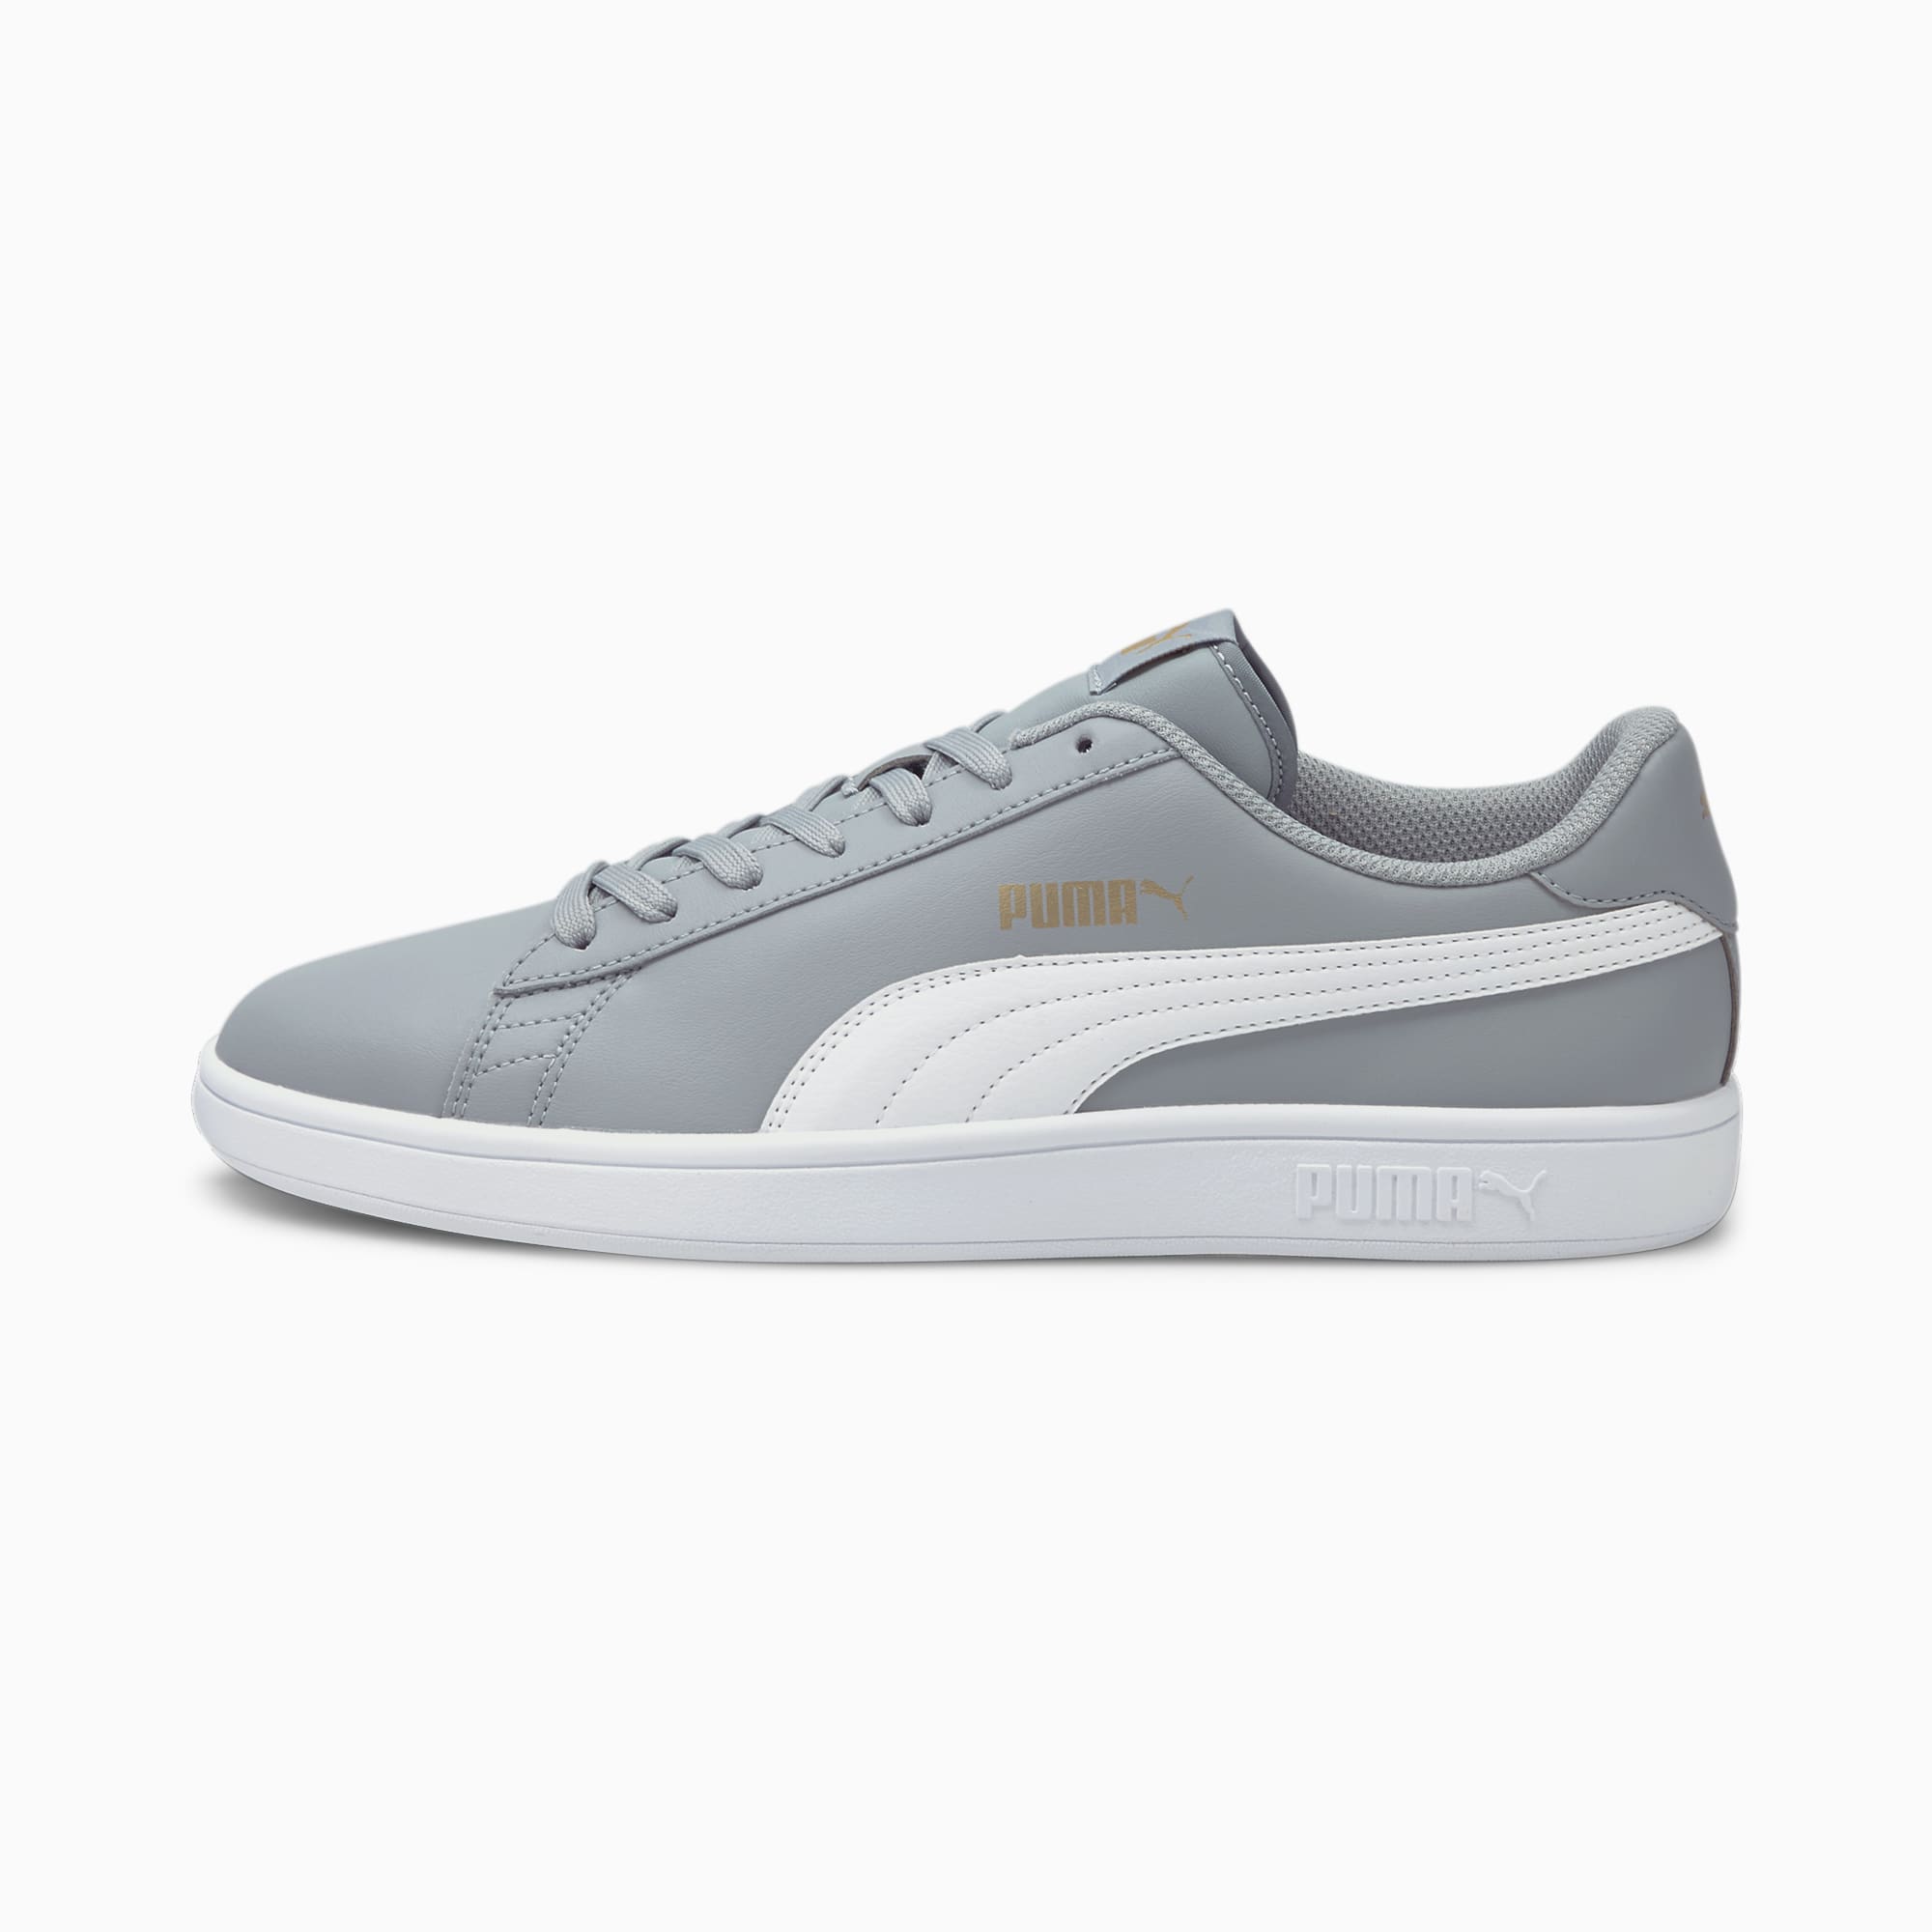 Chaussure Puma Smash v2 L, Gris/Blanc/Or, Taille 48.5, Chaussures